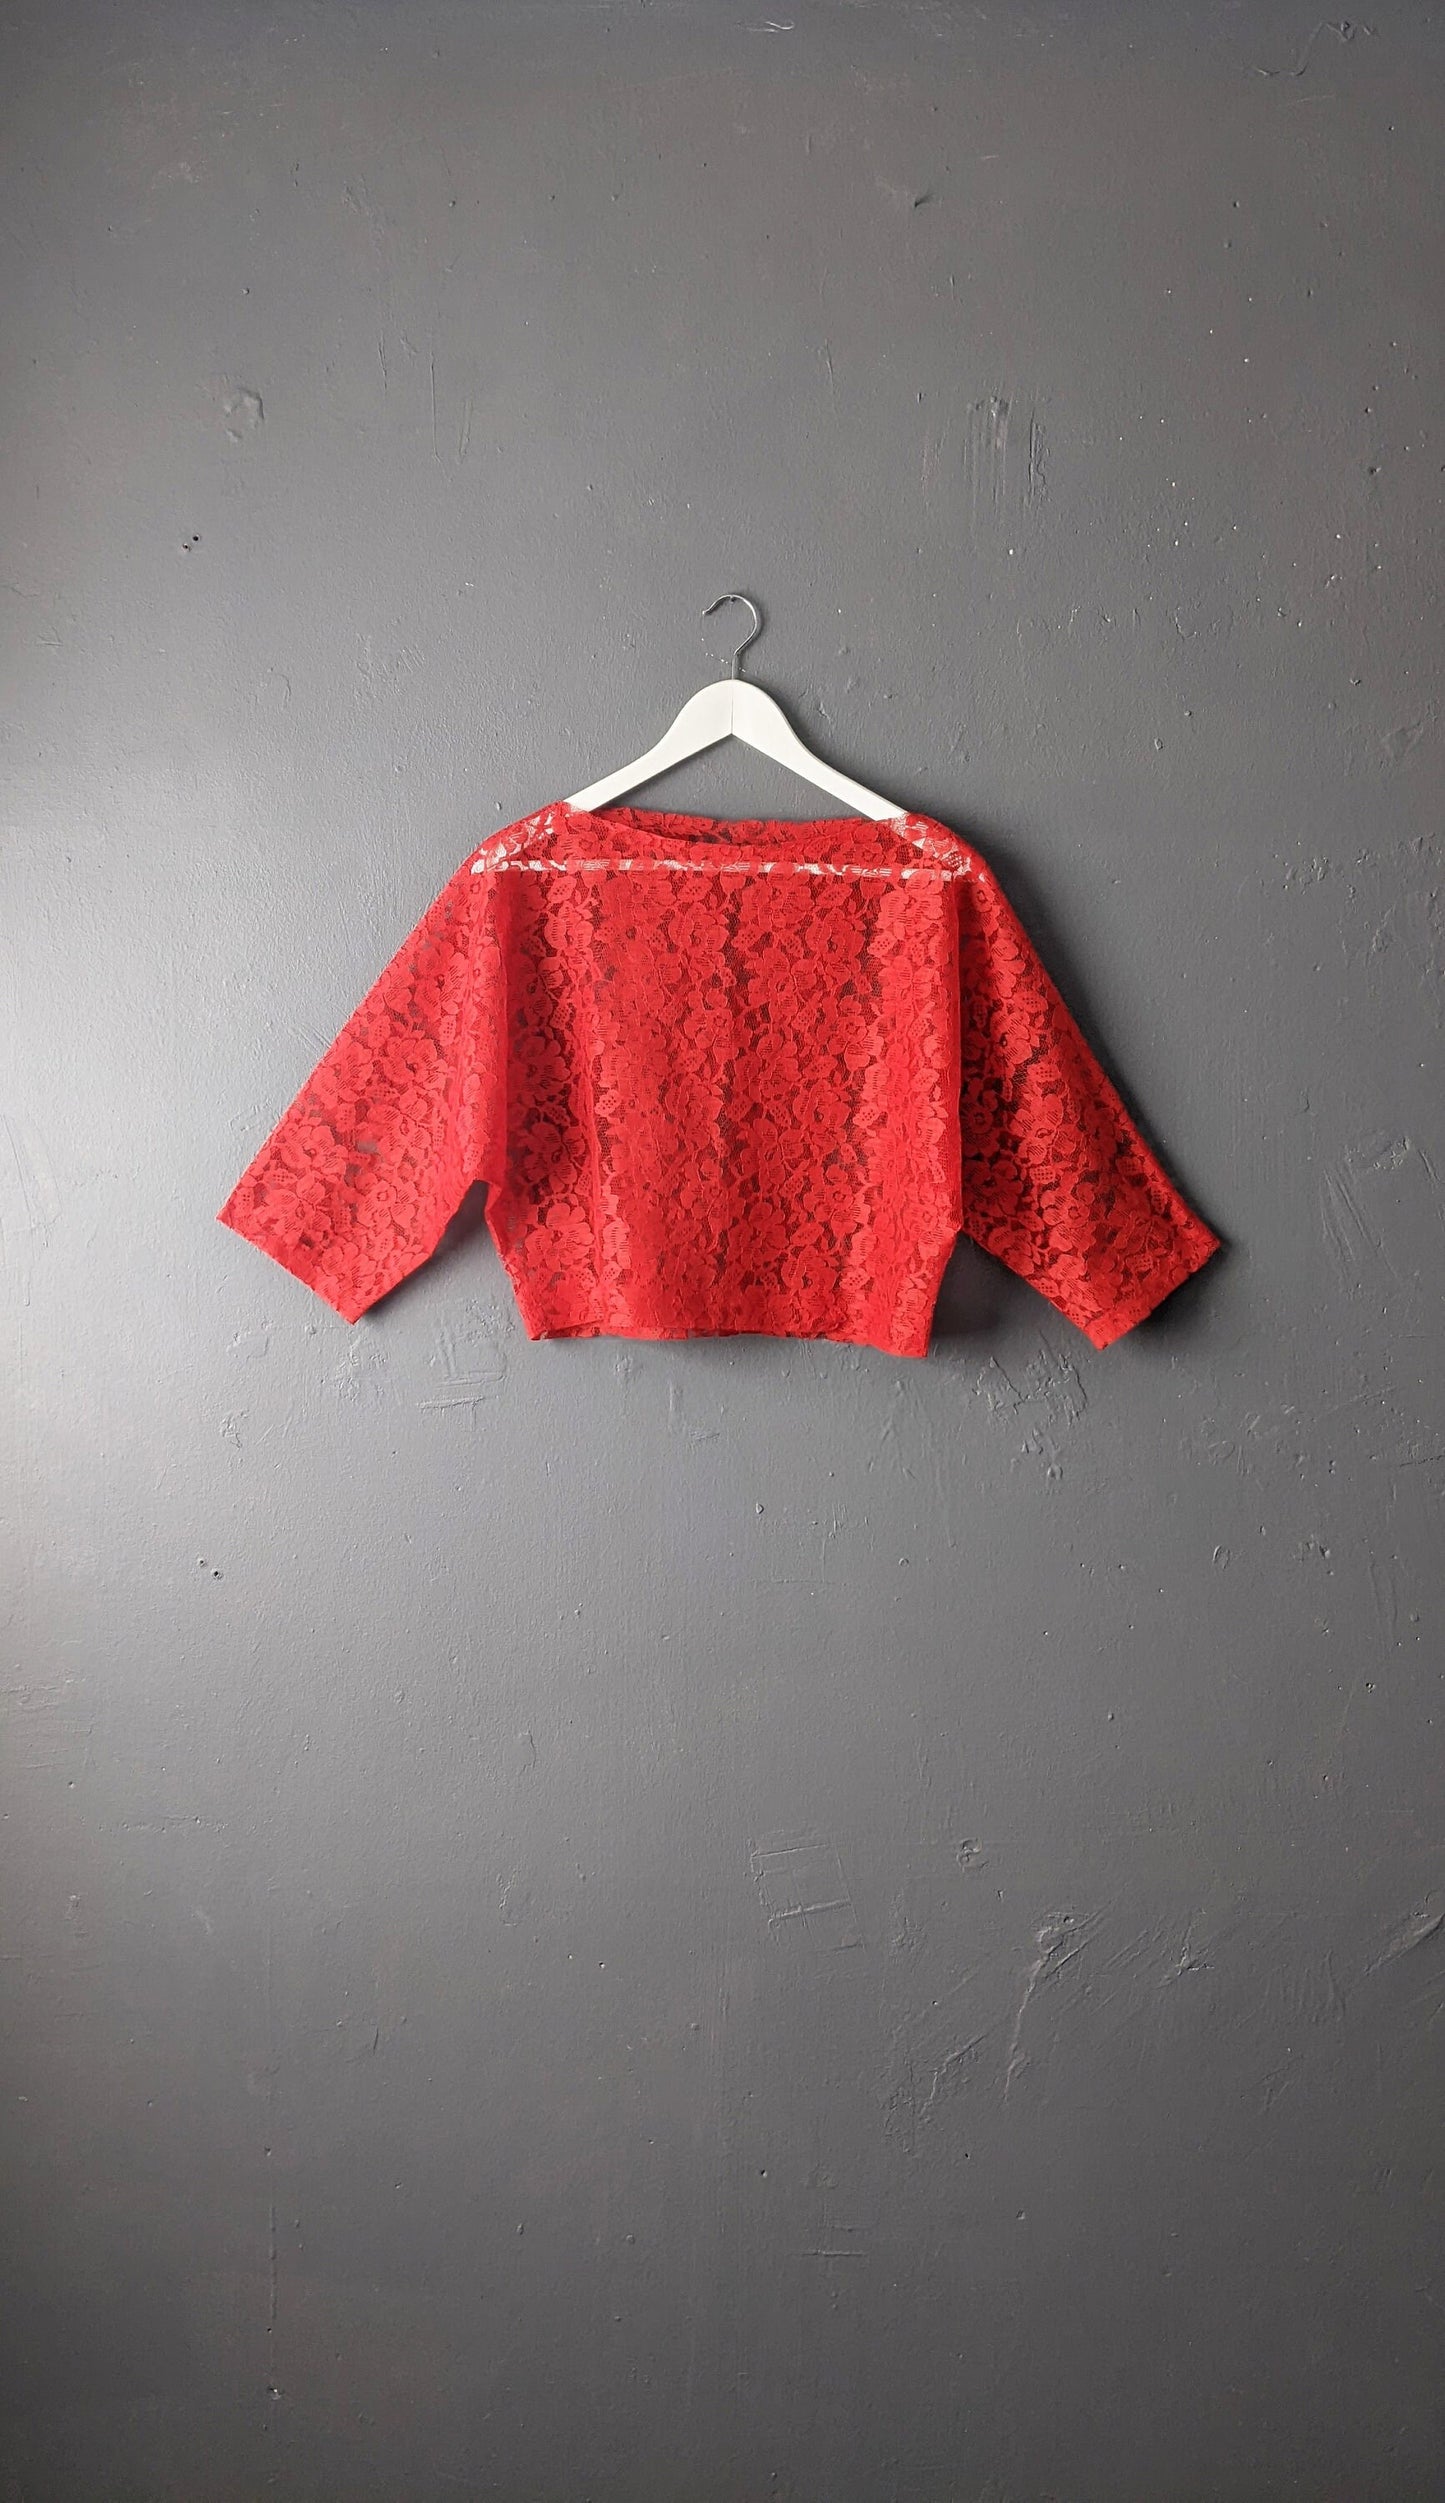 80s Bright Red Cropped Lace Top, Size Small Medium